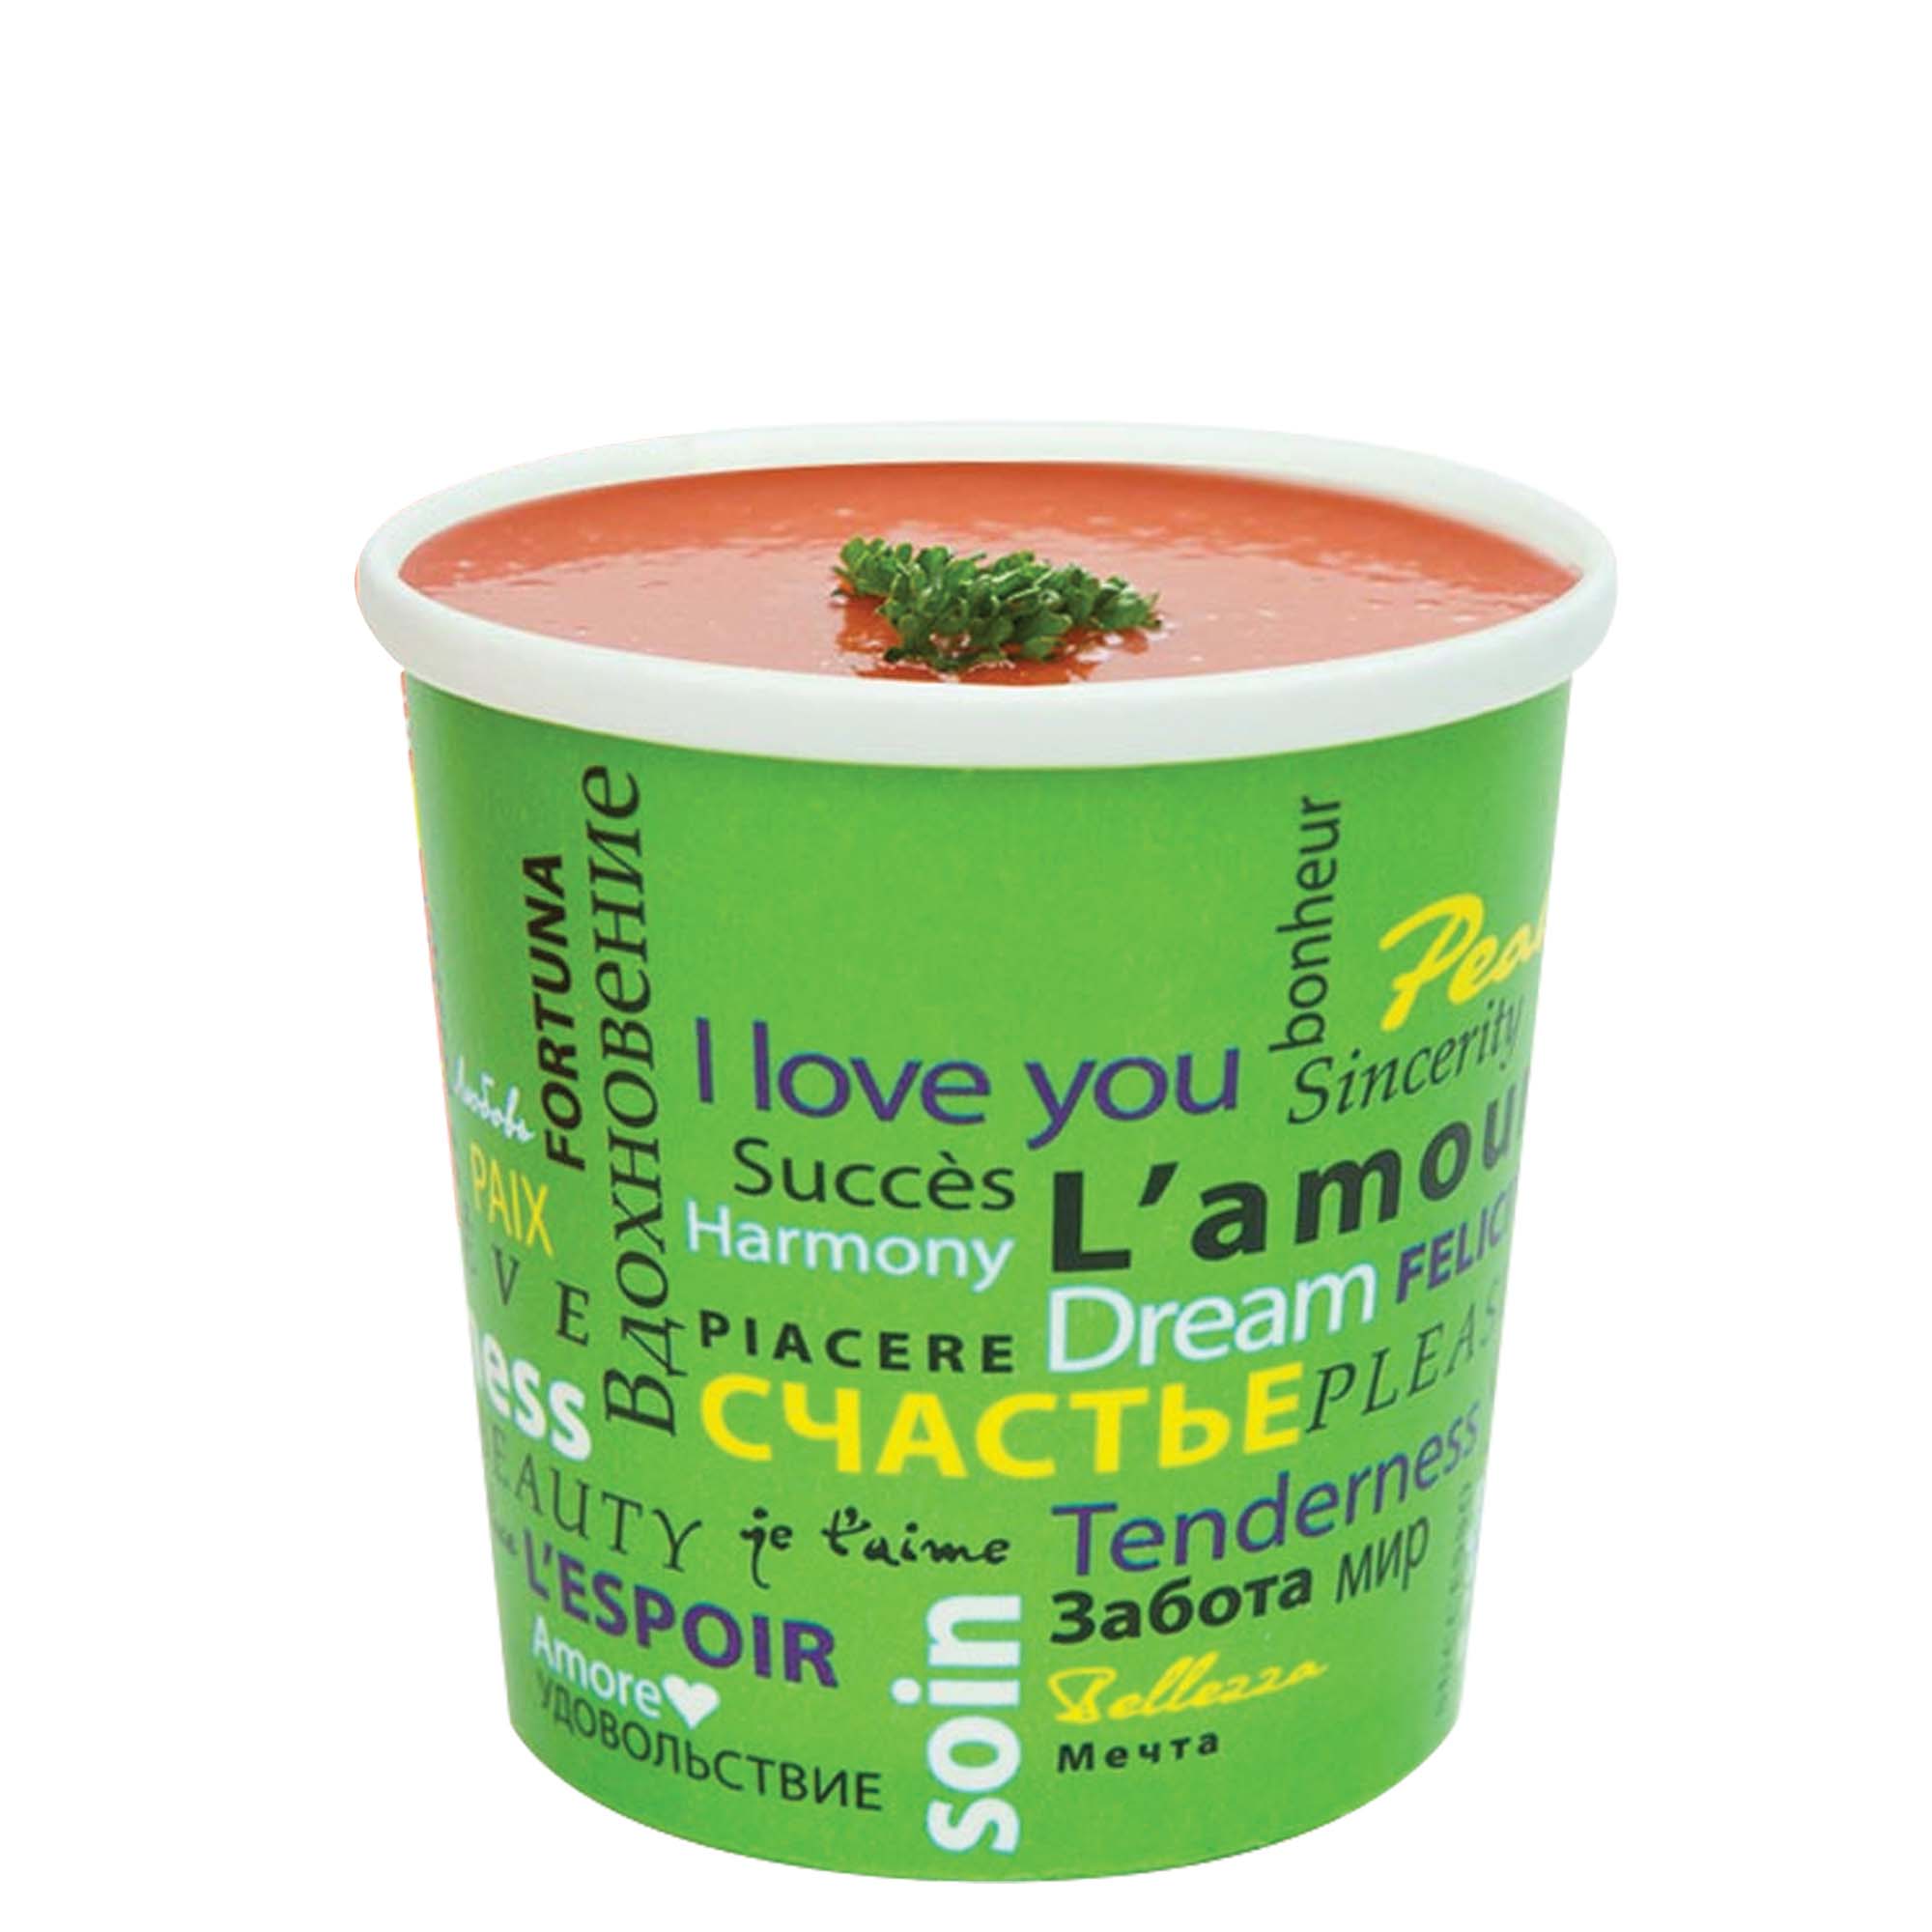 Full Colour Soup Container With Lid [16oz]